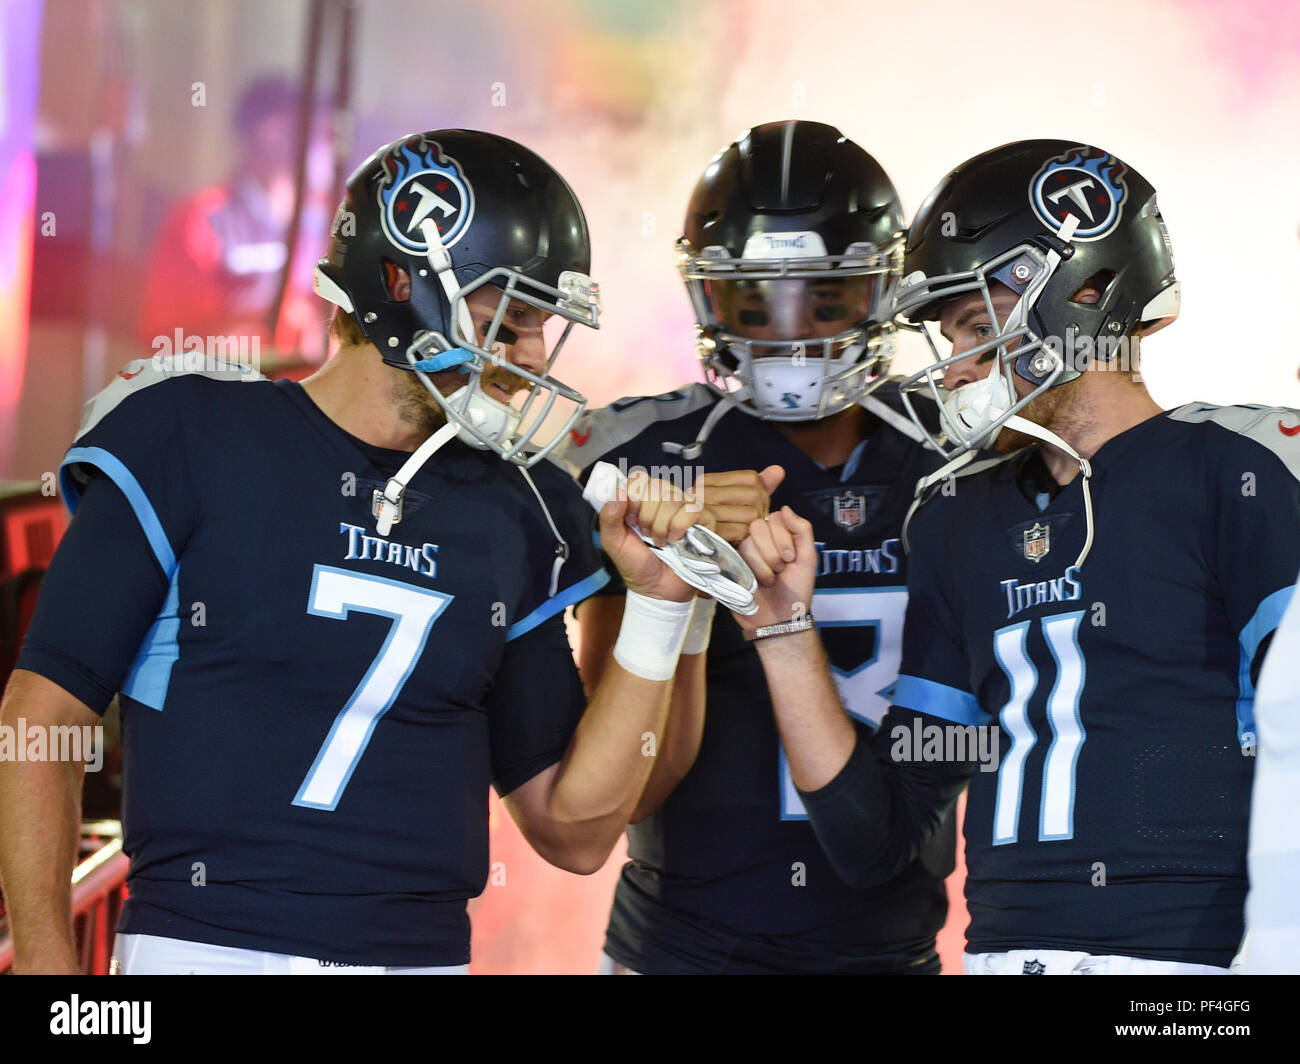 Nashville, USA. 18 August 2018. Tennessee Titans quarterback Blaine Gabbert (7), Tennessee Titans quarterback Marcus Mariota (8), and Tennessee Titans quarterback Luke Falk (11) get ready to head to the field during pre-game between the Tampa Bay Buccaneers and the Tennessee Titans and Nissan Stadium . (Mandatory Photo Credit: Steve Roberts/CSM) Credit: Cal Sport Media/Alamy Live News Stock Photo